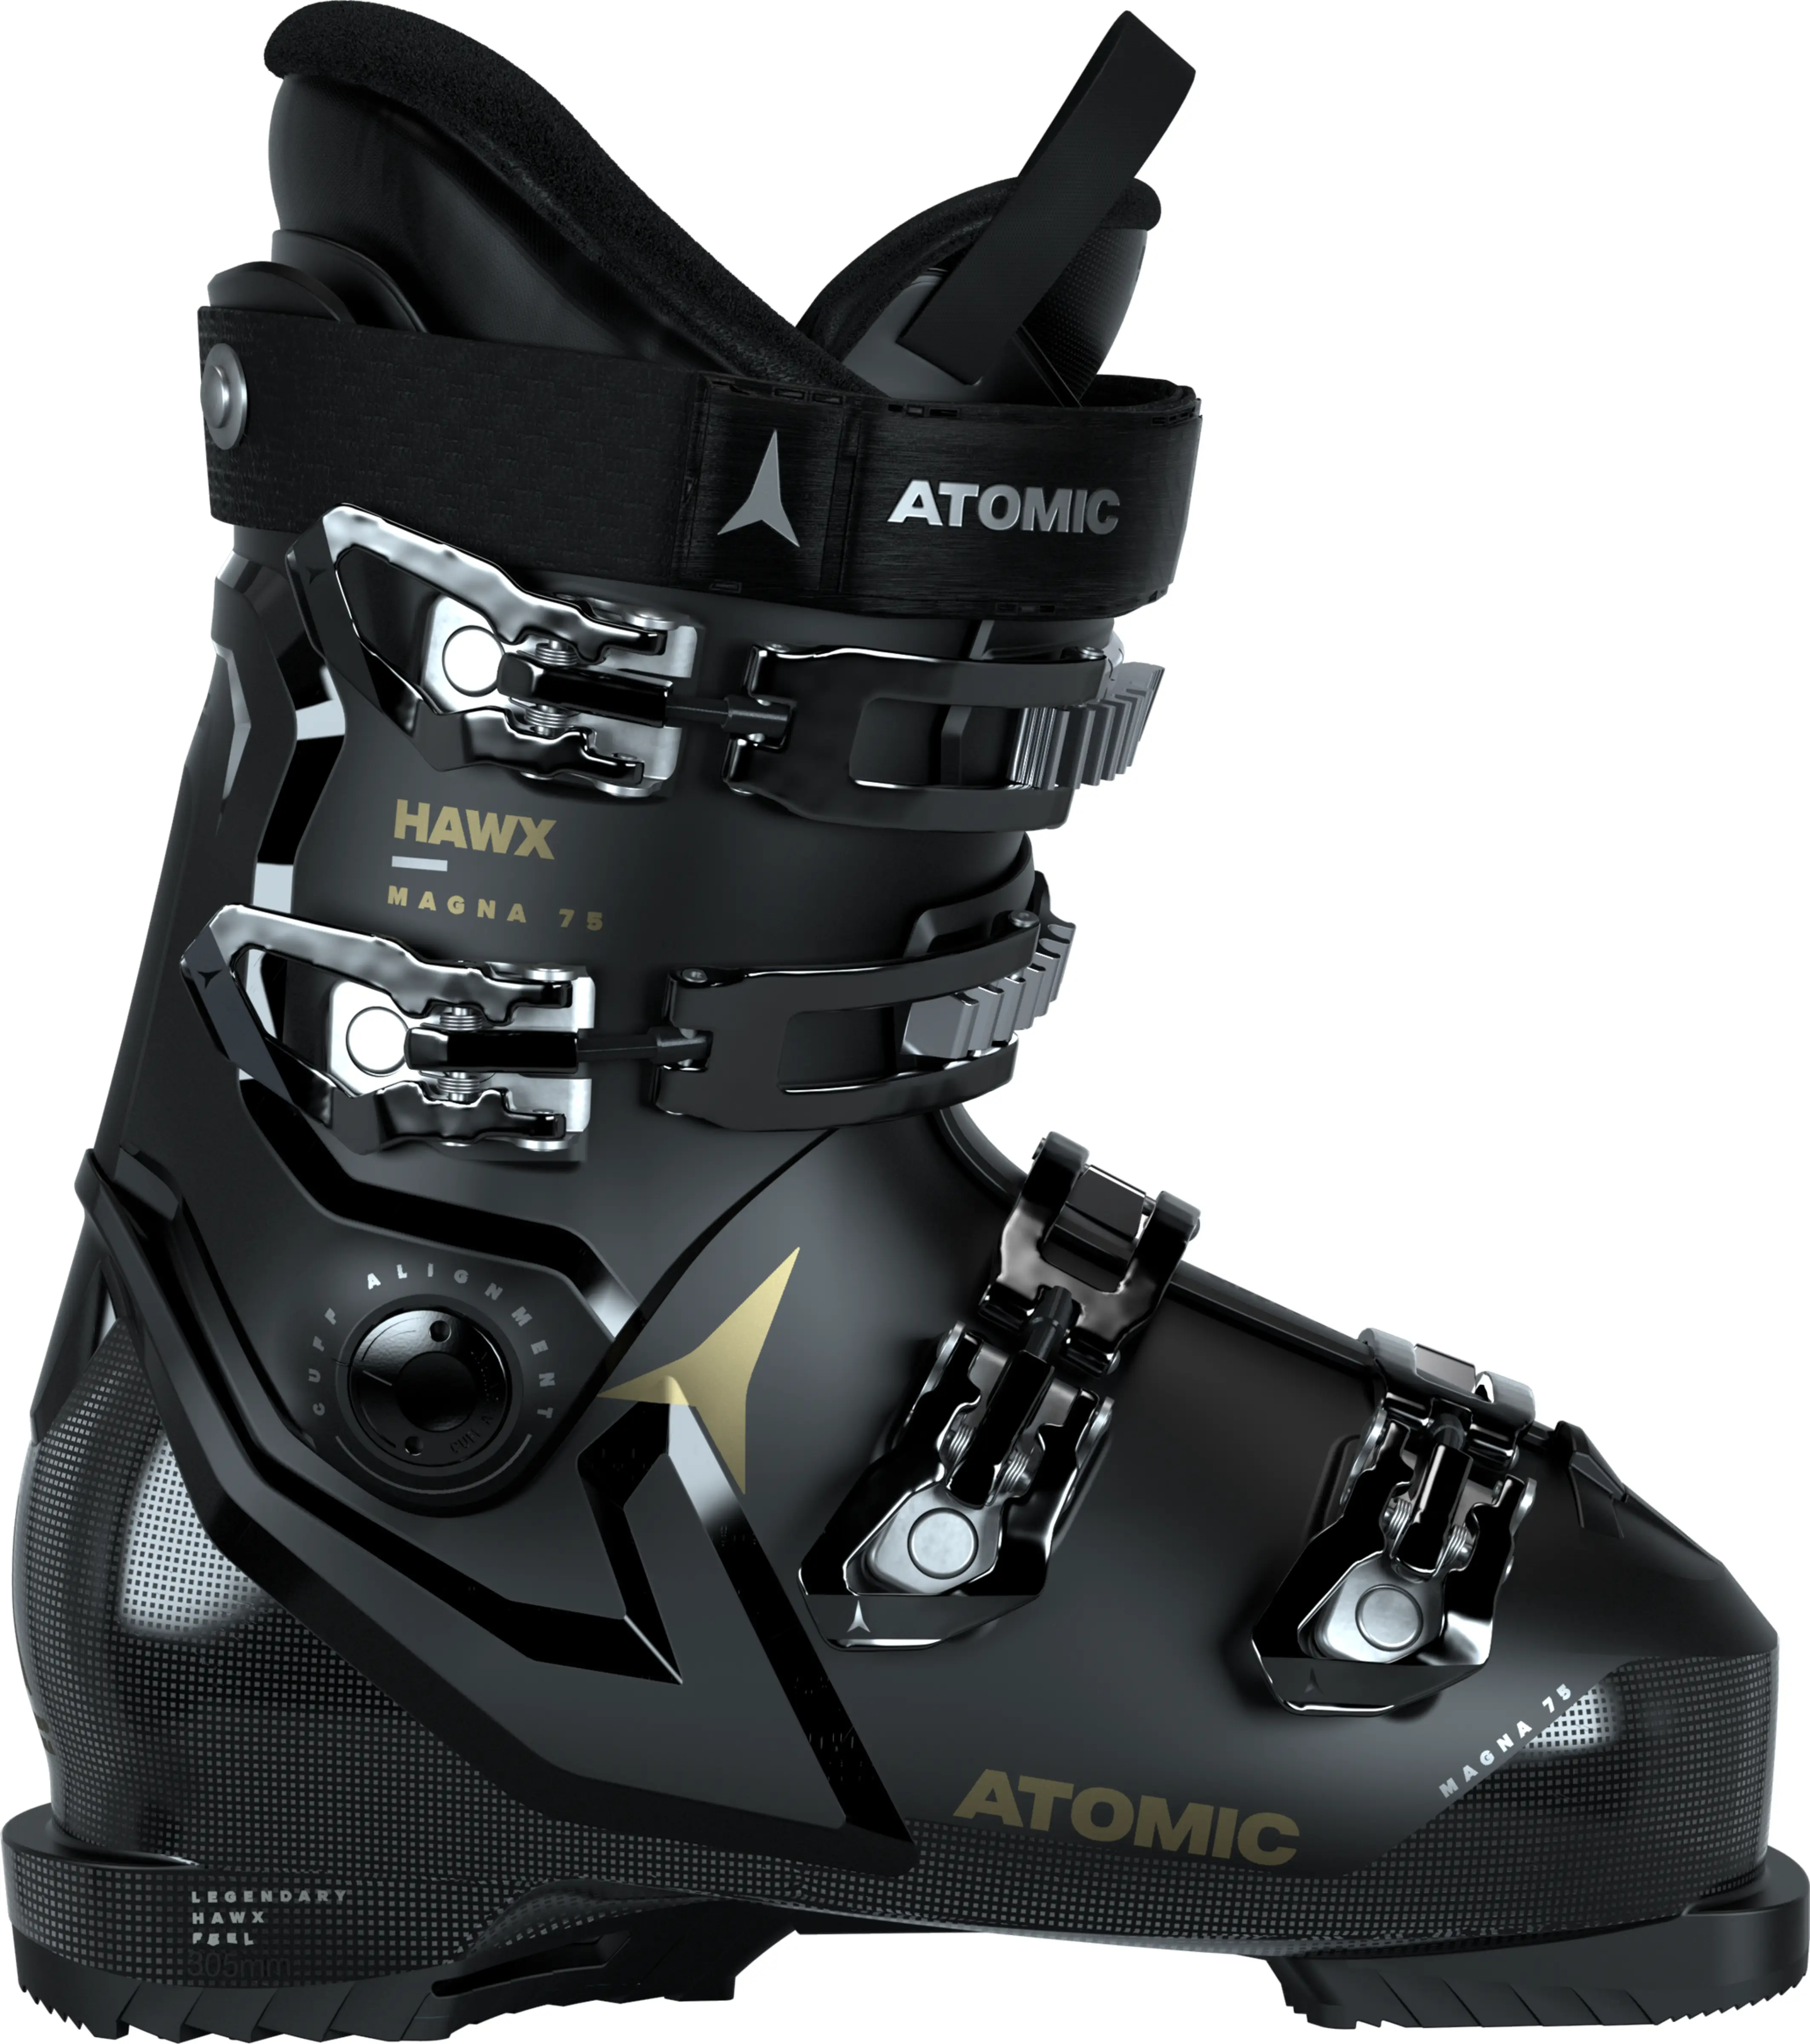 Image 0 of ATOMIC - HAWX MAGNA 75 WOMEN'S BOOTS - 2023